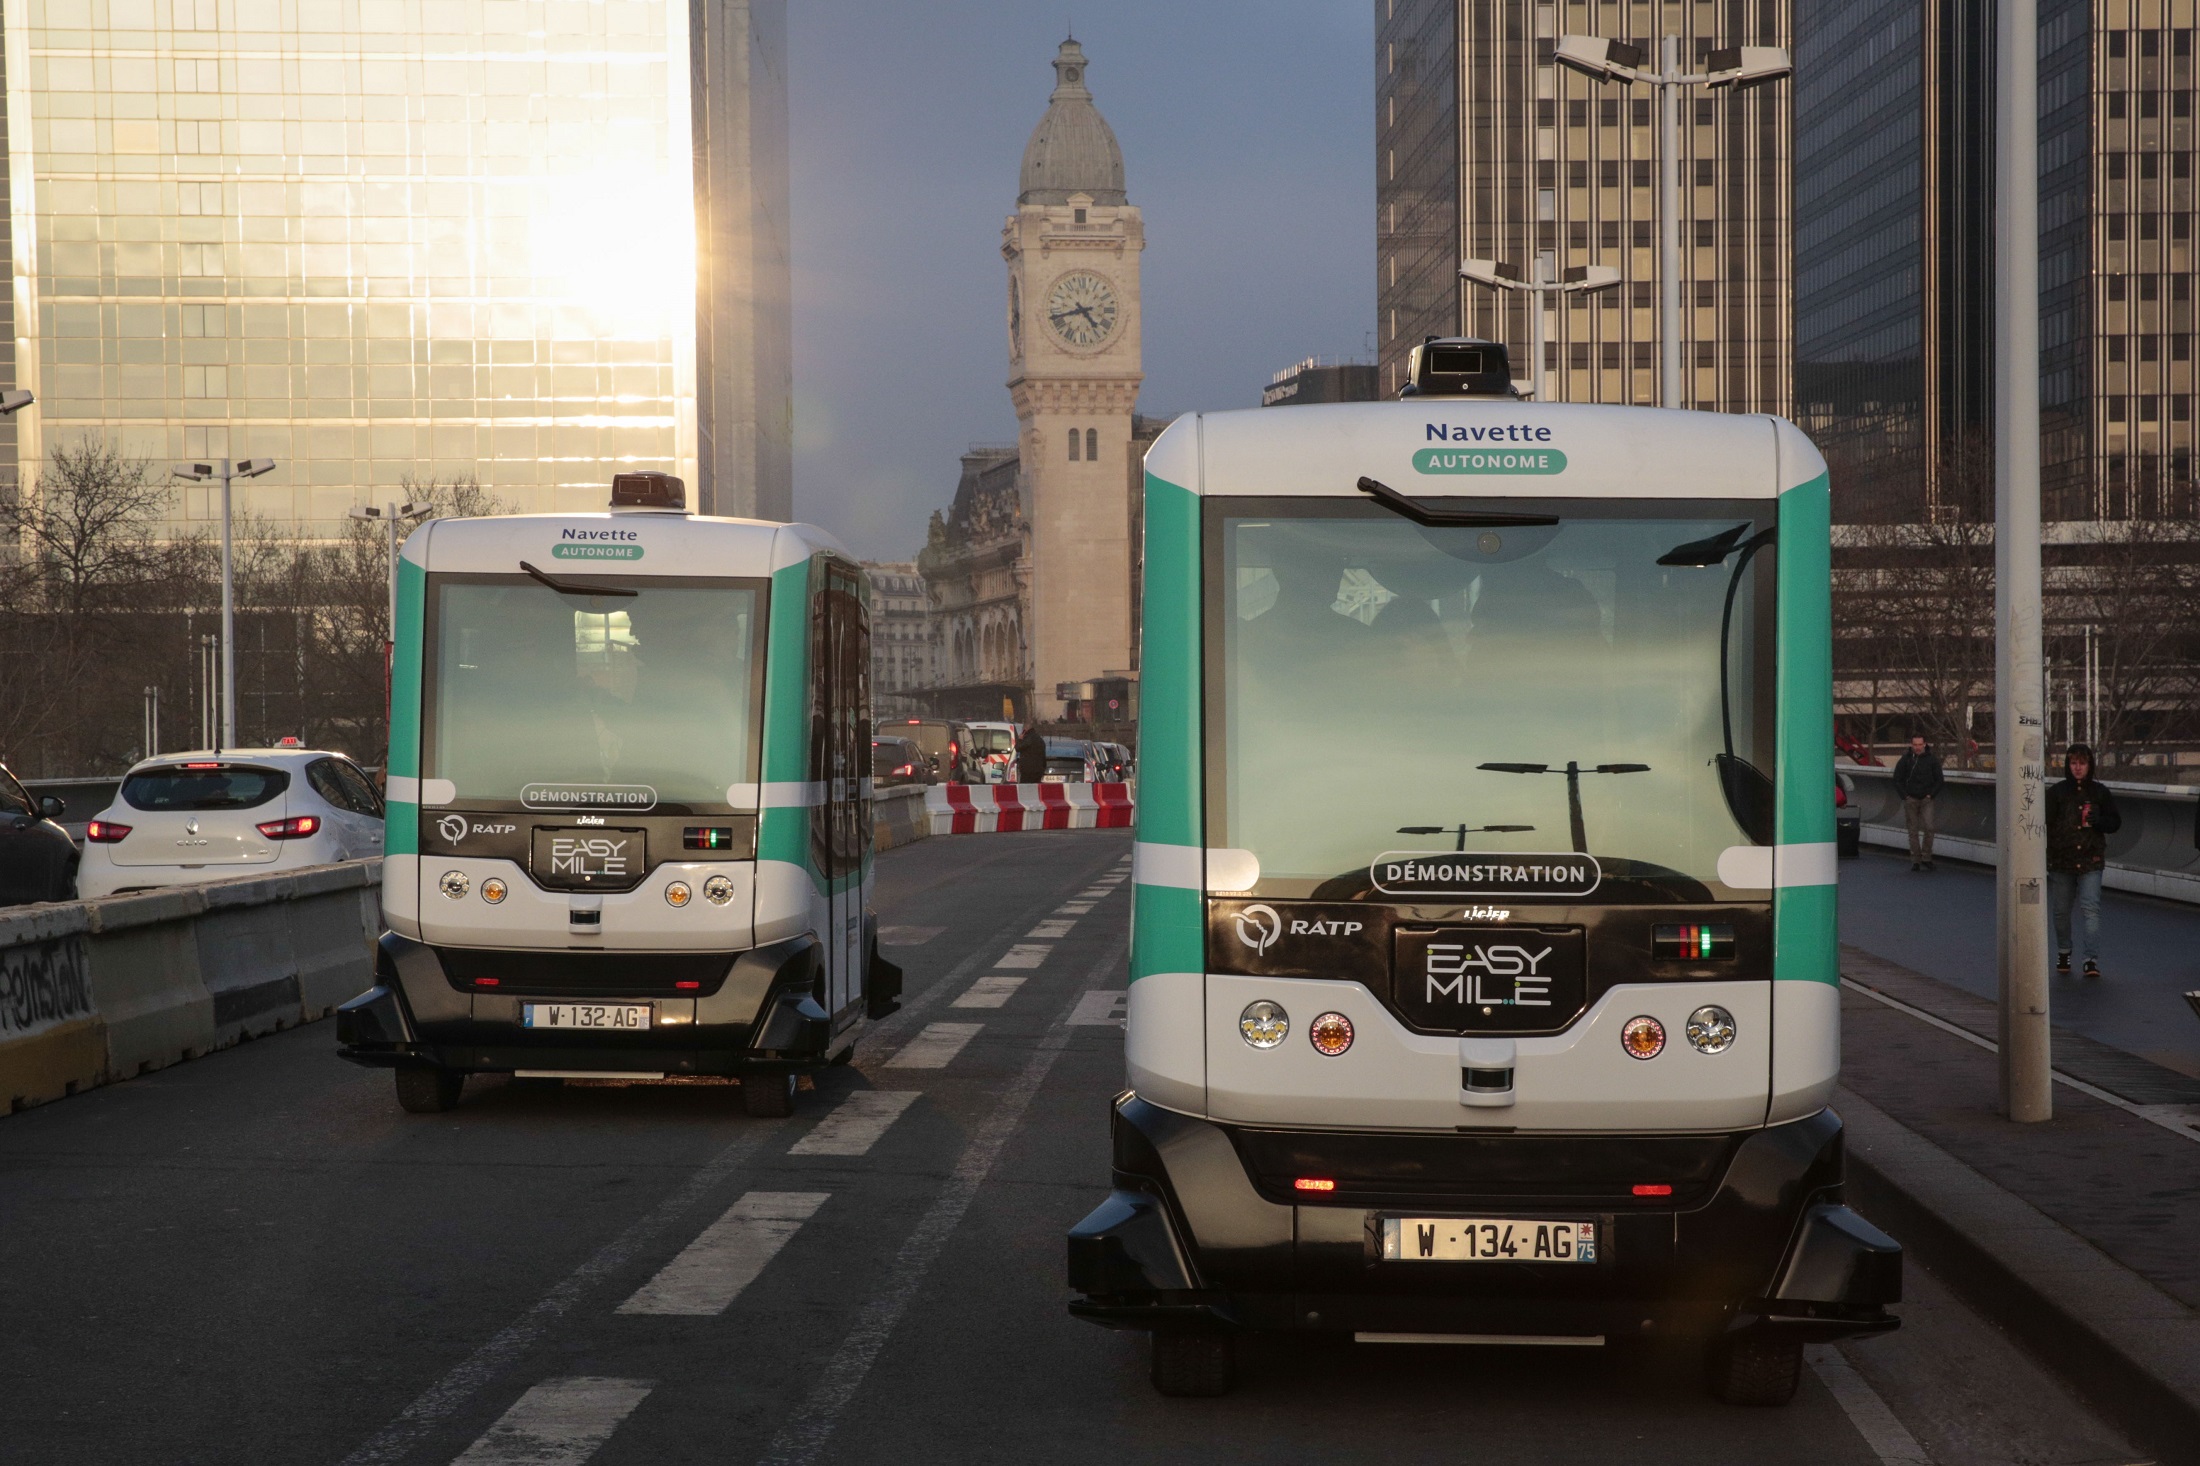 Two self-driving bus shuttles between Austrelitz station and Lyon station in Paris, produced by Easymile company in Paris on January 23, 2017. The RATP tests two autonomous and electric minibuses in Paris, they will transport passengers between the stations of Lyon and Austerlitz for a little over two months free of charge on a dedicated lane. / AFP PHOTO / GEOFFROY VAN DER HASSELT